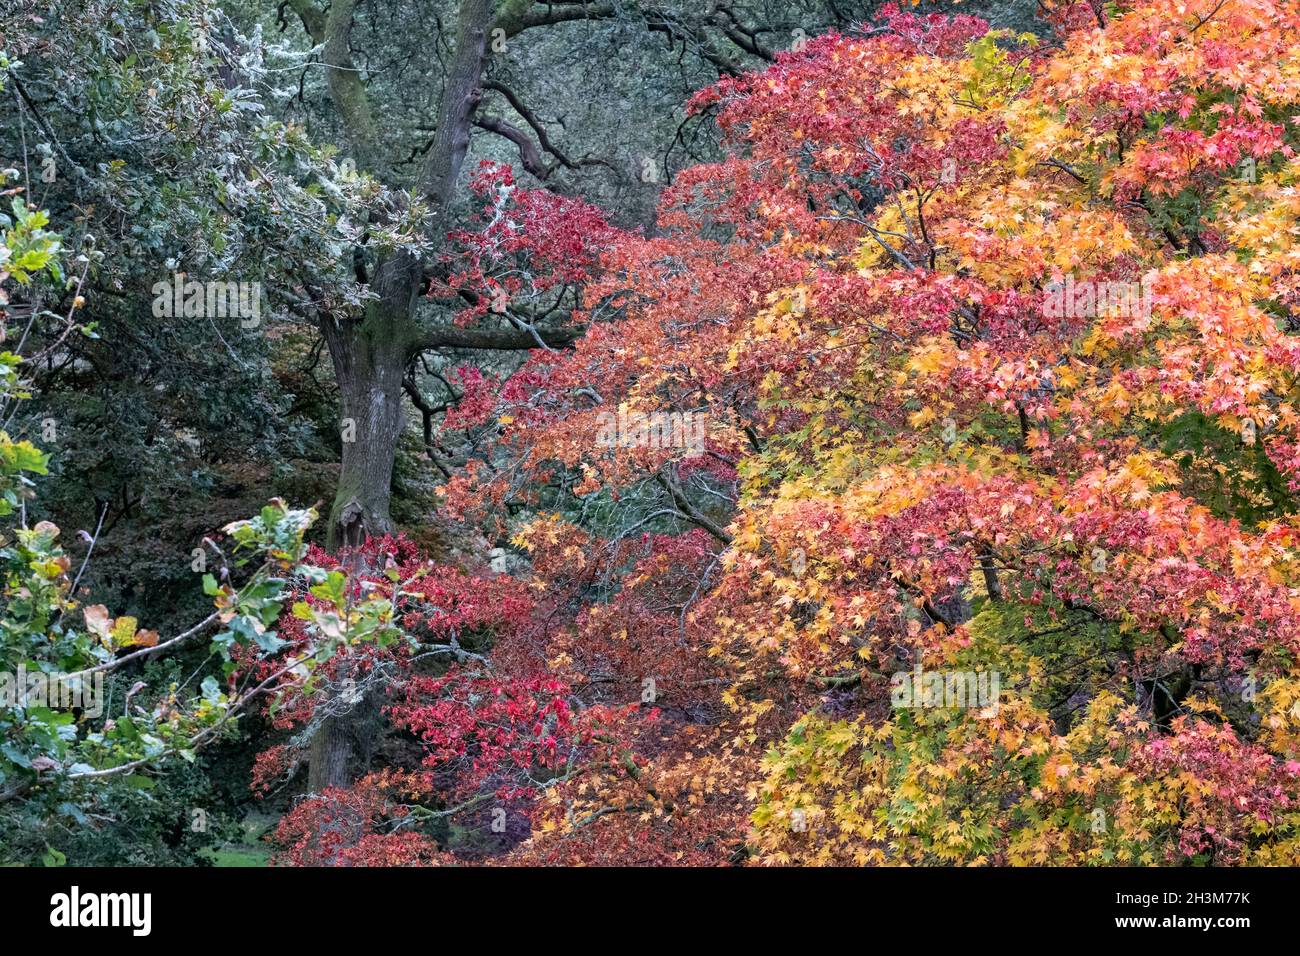 Variety of trees including acer, cherry and maple trees in a blaze of autumn colour, photographed at Winkworth Arboretum, Surrey, UK. Stock Photo